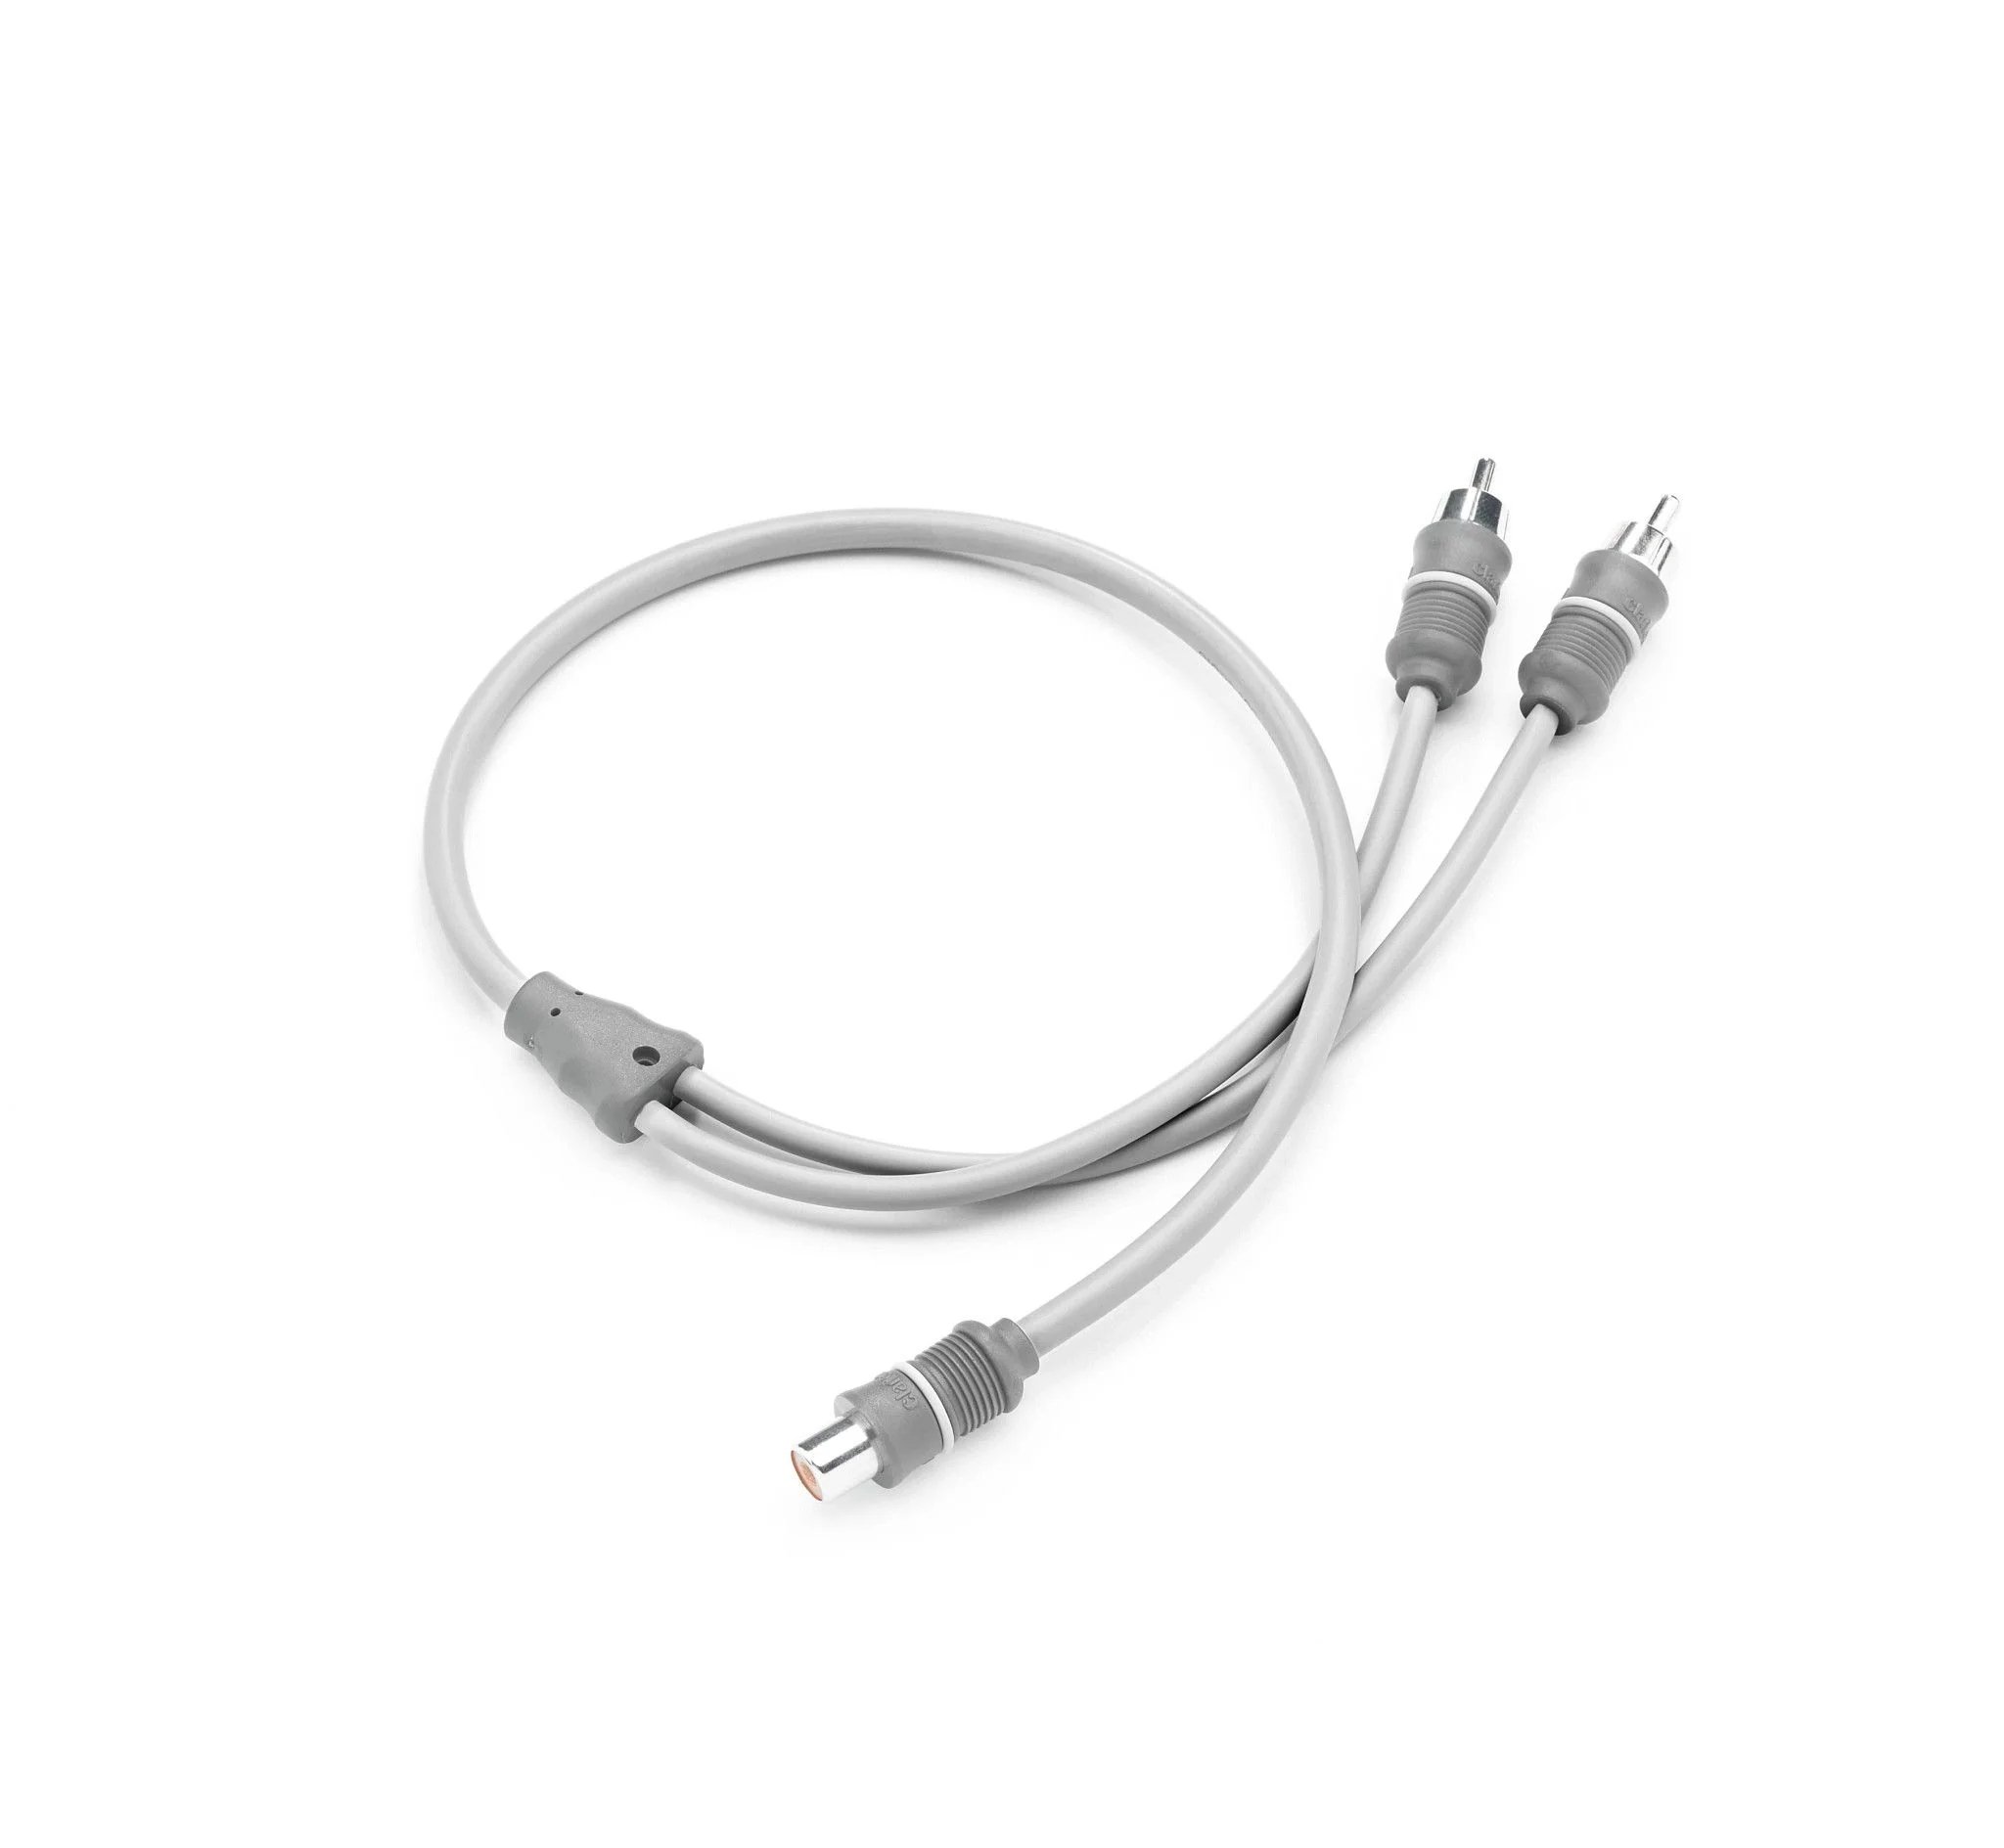 Cable audio 2 CH Y-adaptor 1 female to 2 male with brass connectors